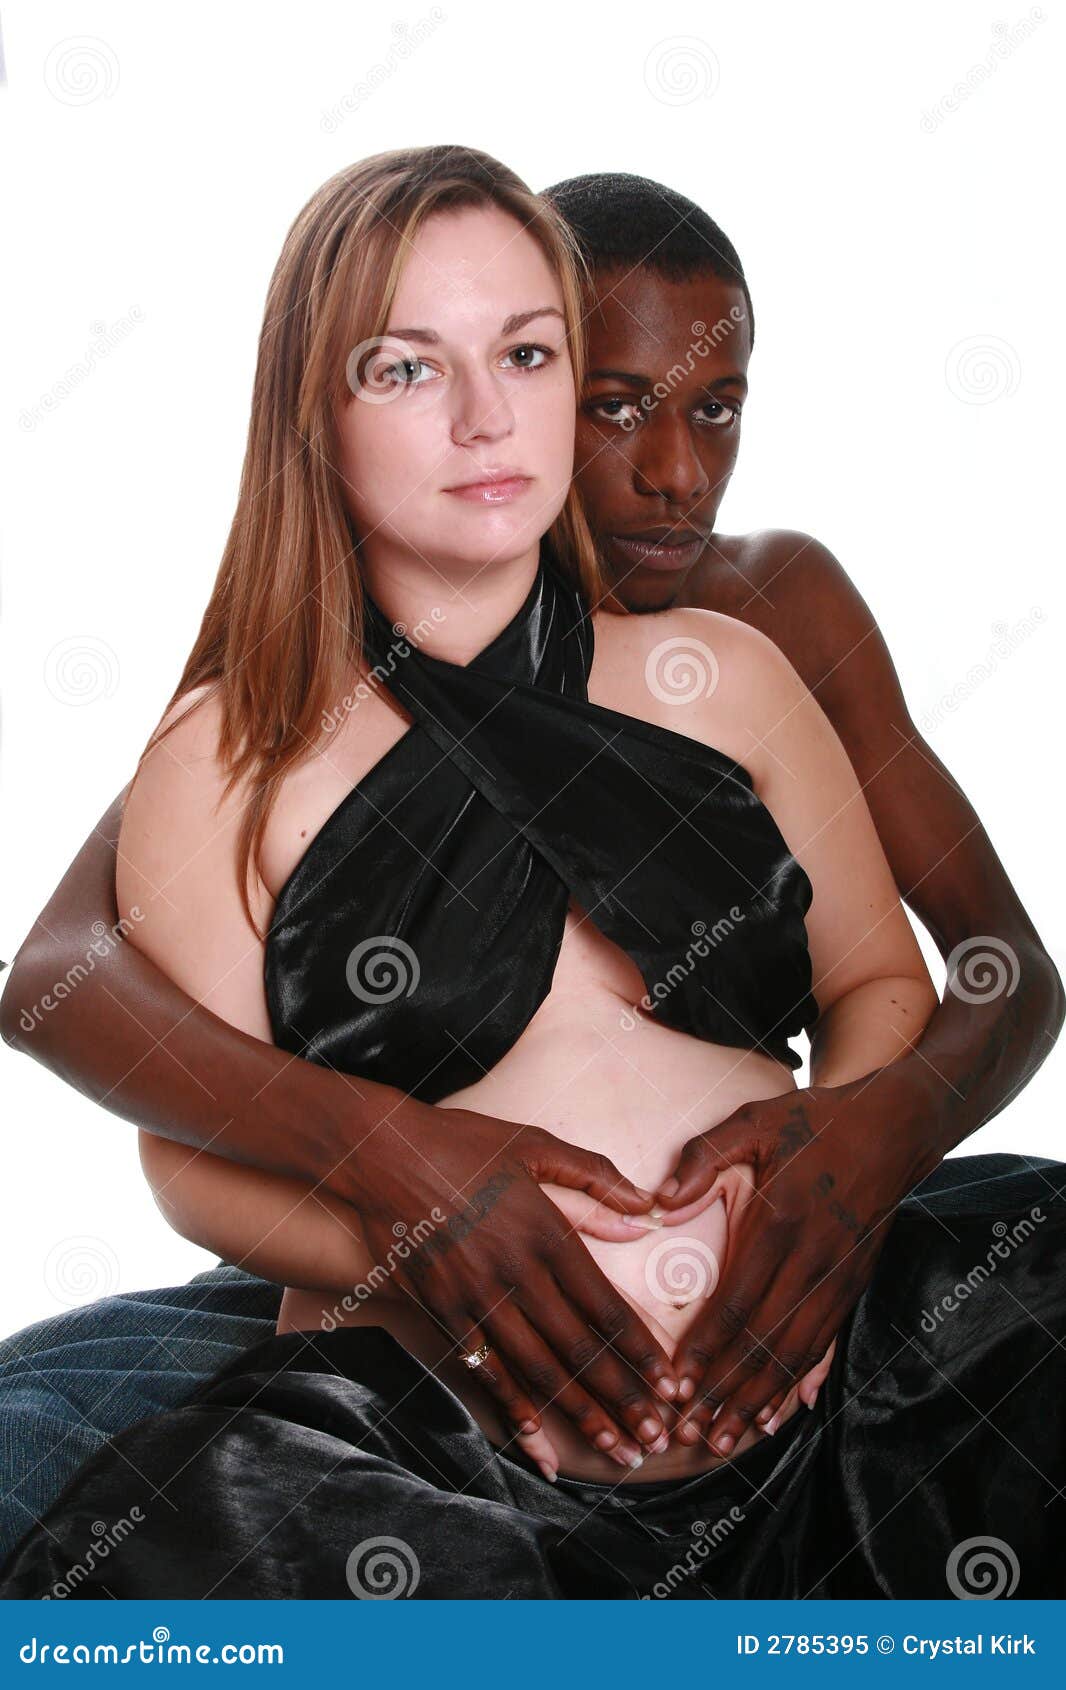 young-couple-expecting-baby-2785395.jpg